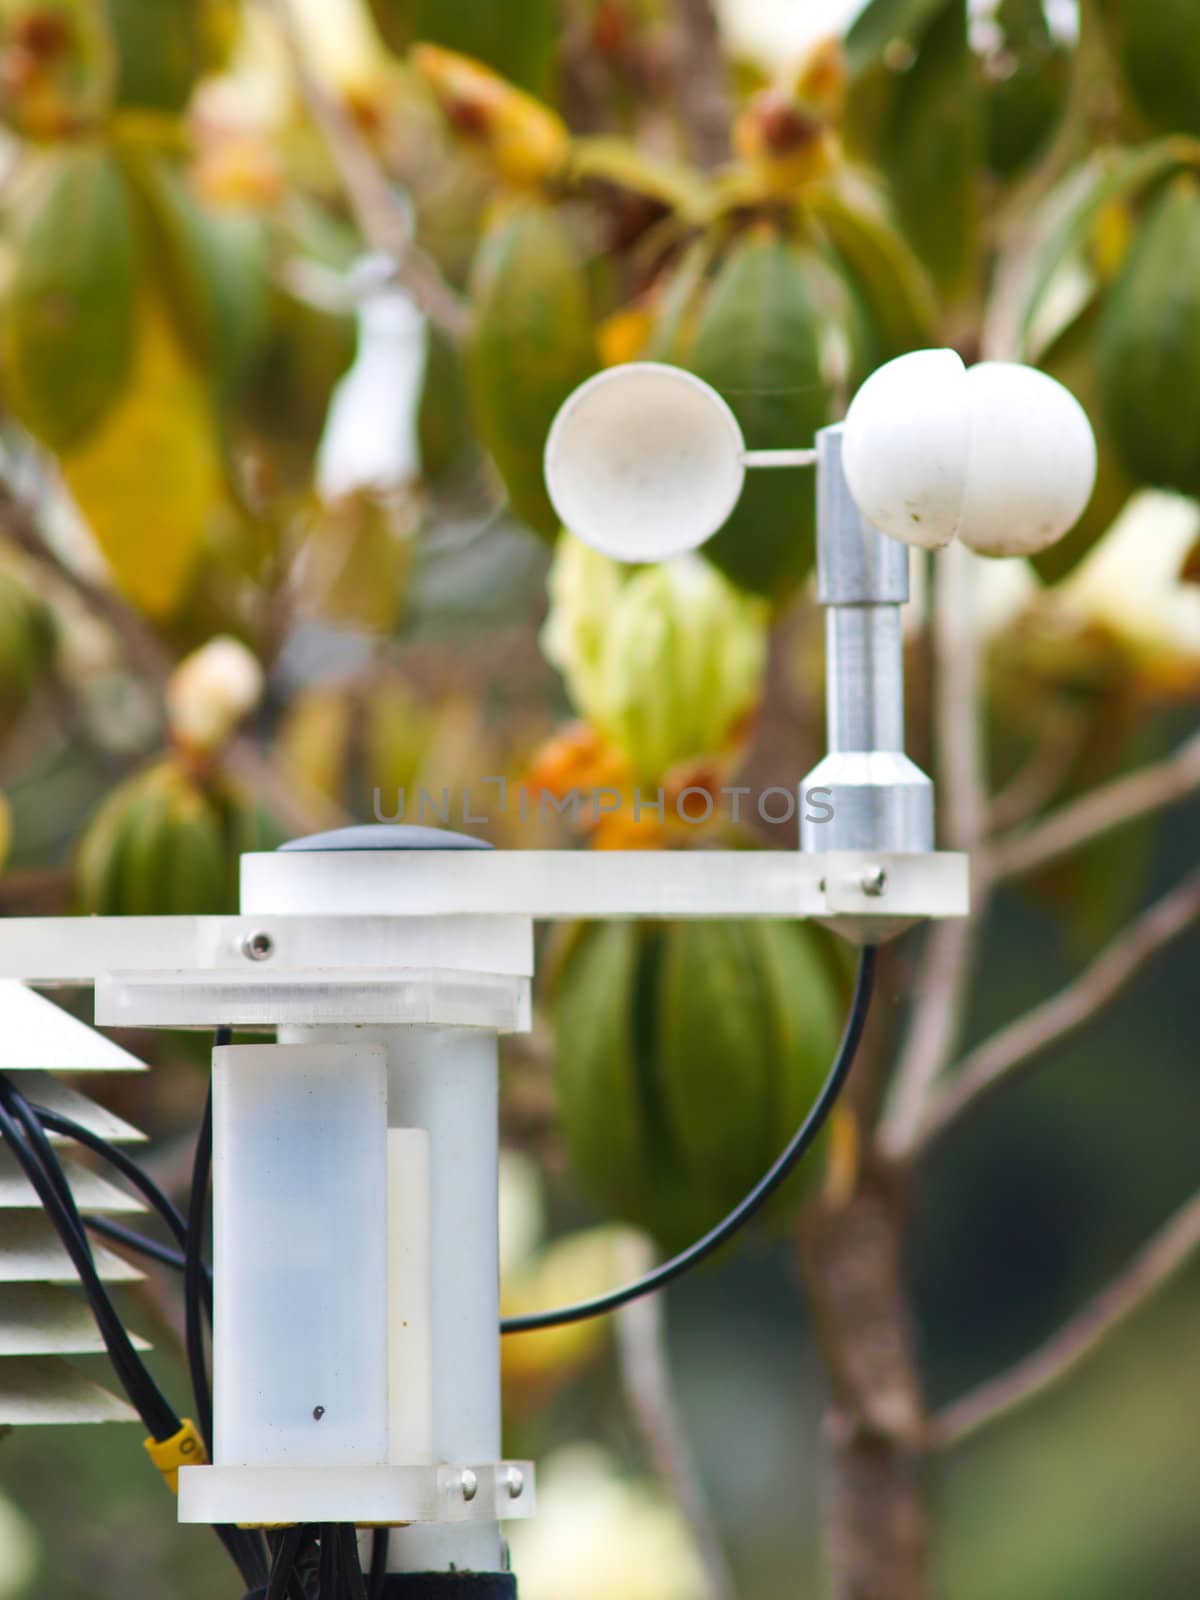 An Anemometer in nature at a Meteorological station by gururugu